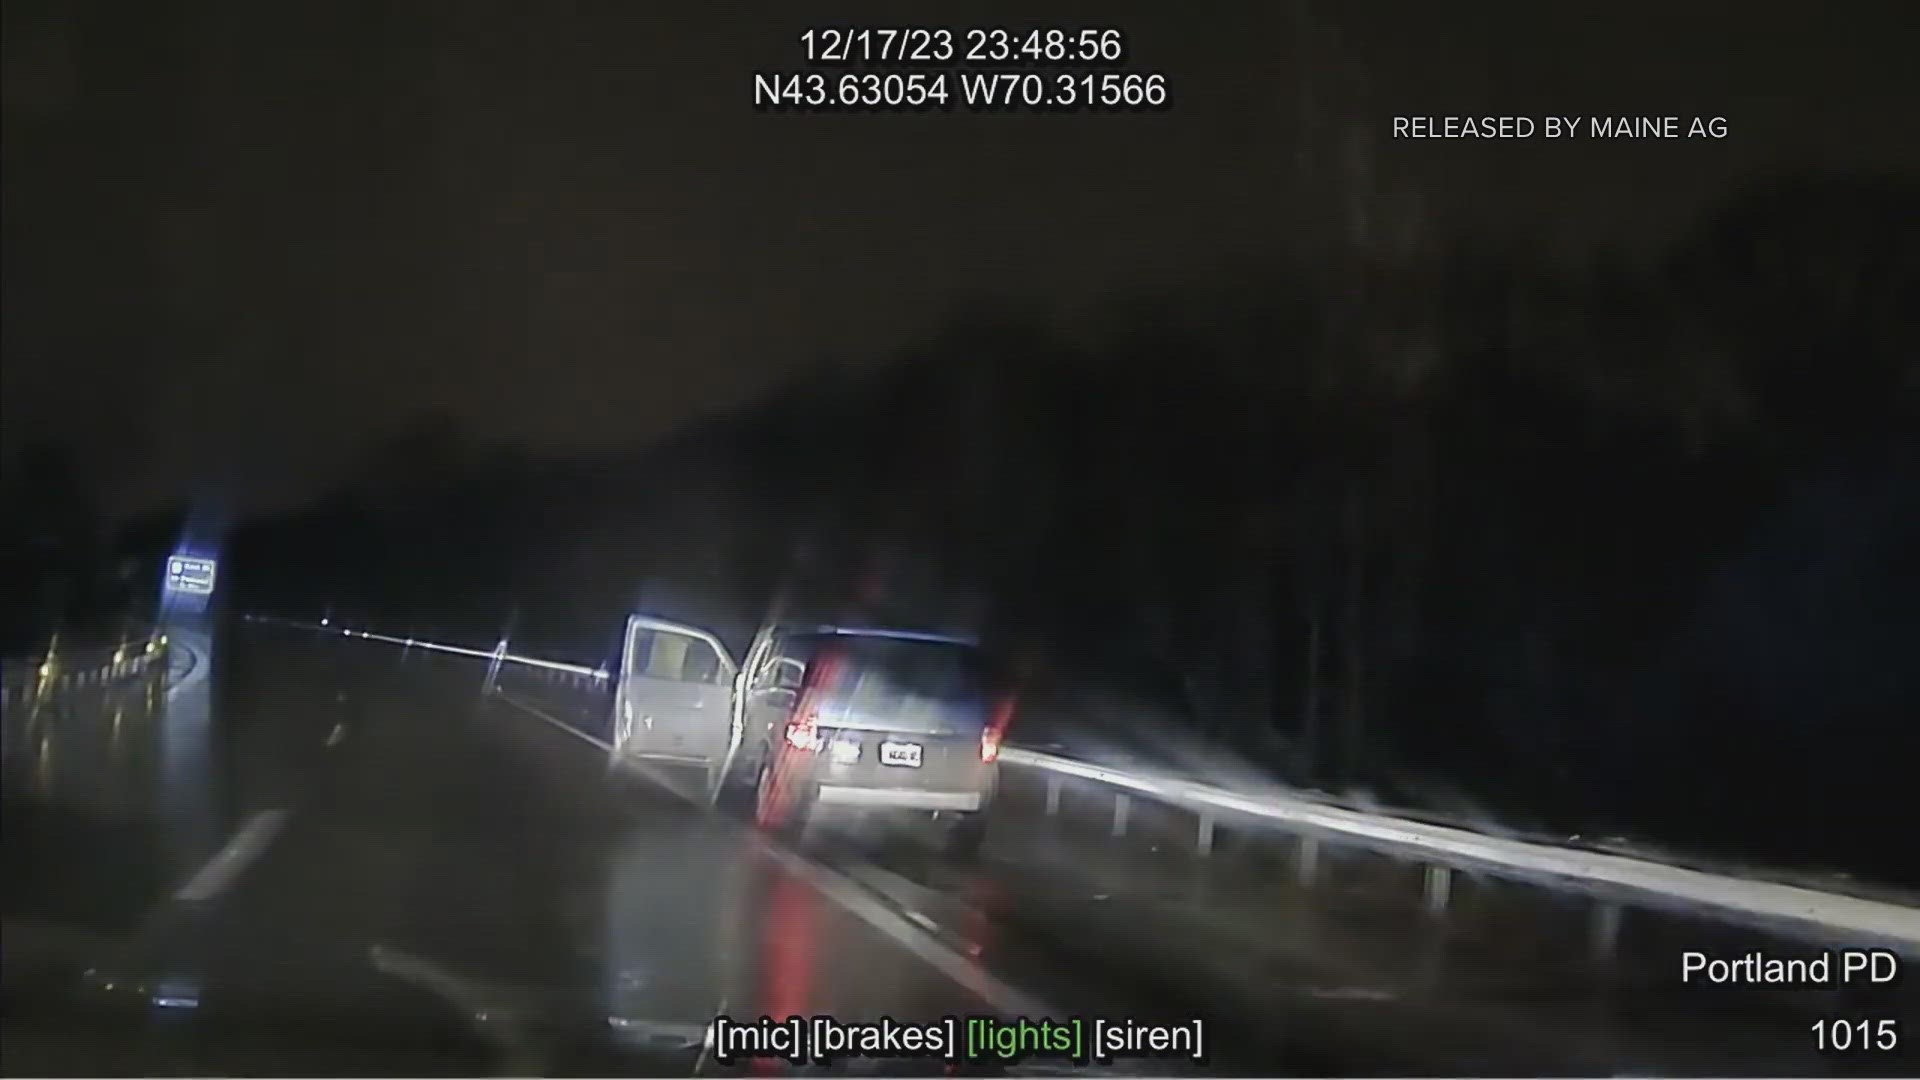 The Office of the Maine Attorney General has released the video footage it's using to investigate a deadly police shooting late Sunday night on I-295.